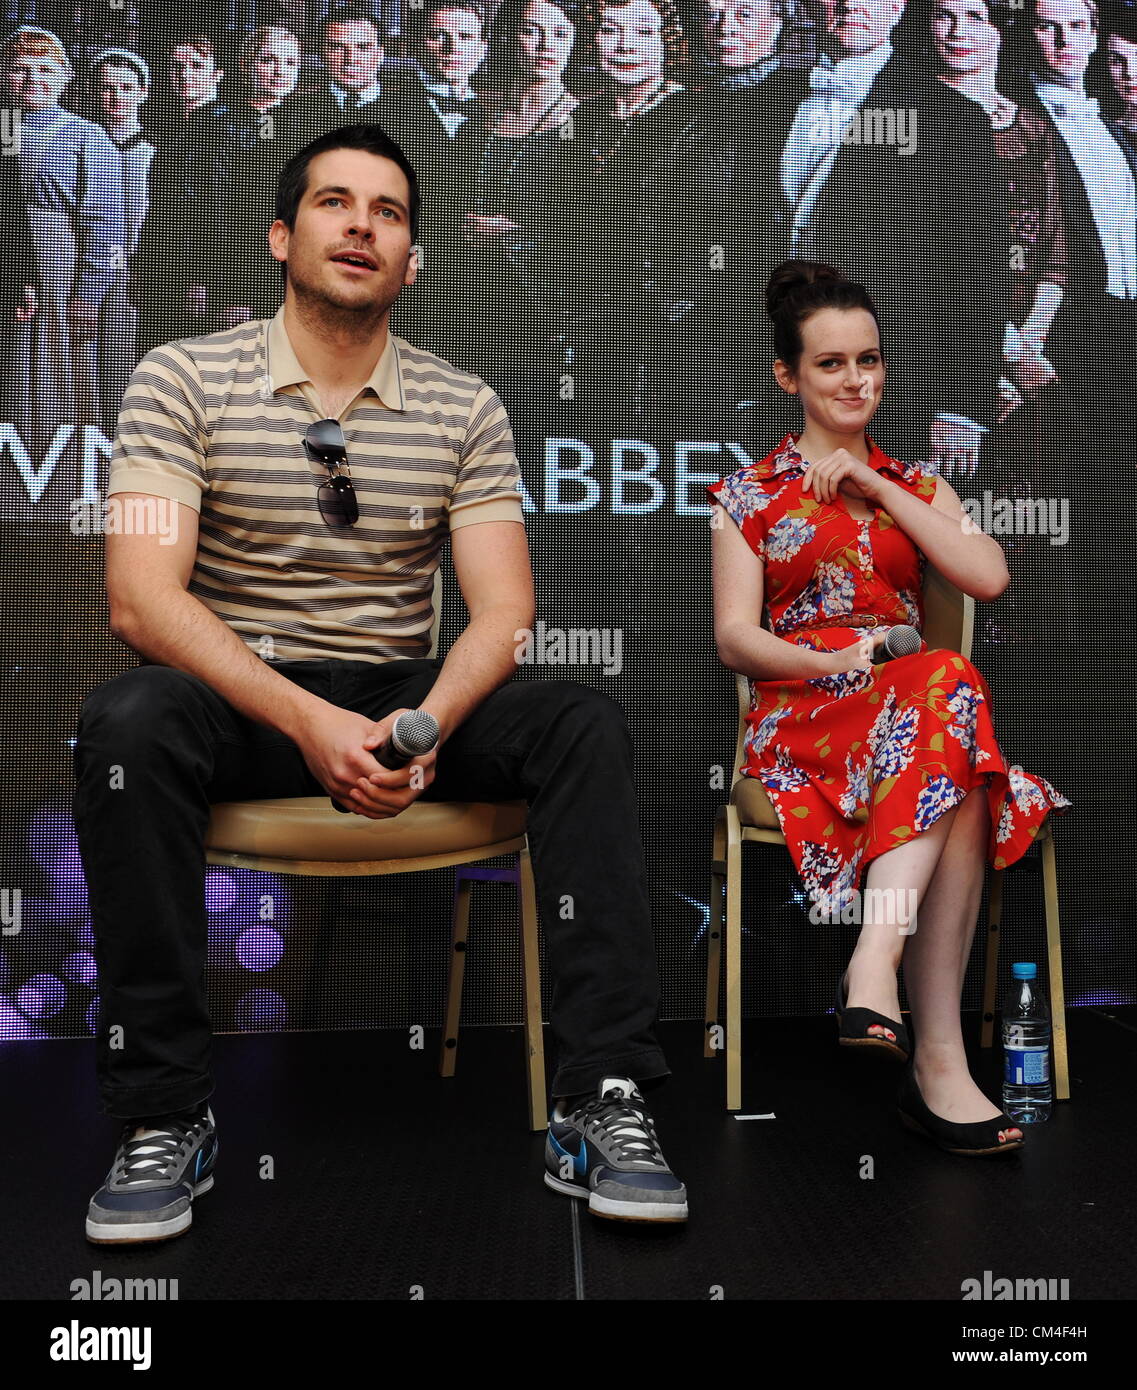 Johannesburg, South Africa. 2nd October 2012. British actors from the popular show Downton Abbey Robert James-Collier and Sophie McShera on October 2, 2012 as the BBC holds a showcase on the network’s new programmes in Johannesburg, South Africa. (Photo by Gallo Images / Foto24 / Mary-Ann Palmer / Alamy Live News) Stock Photo